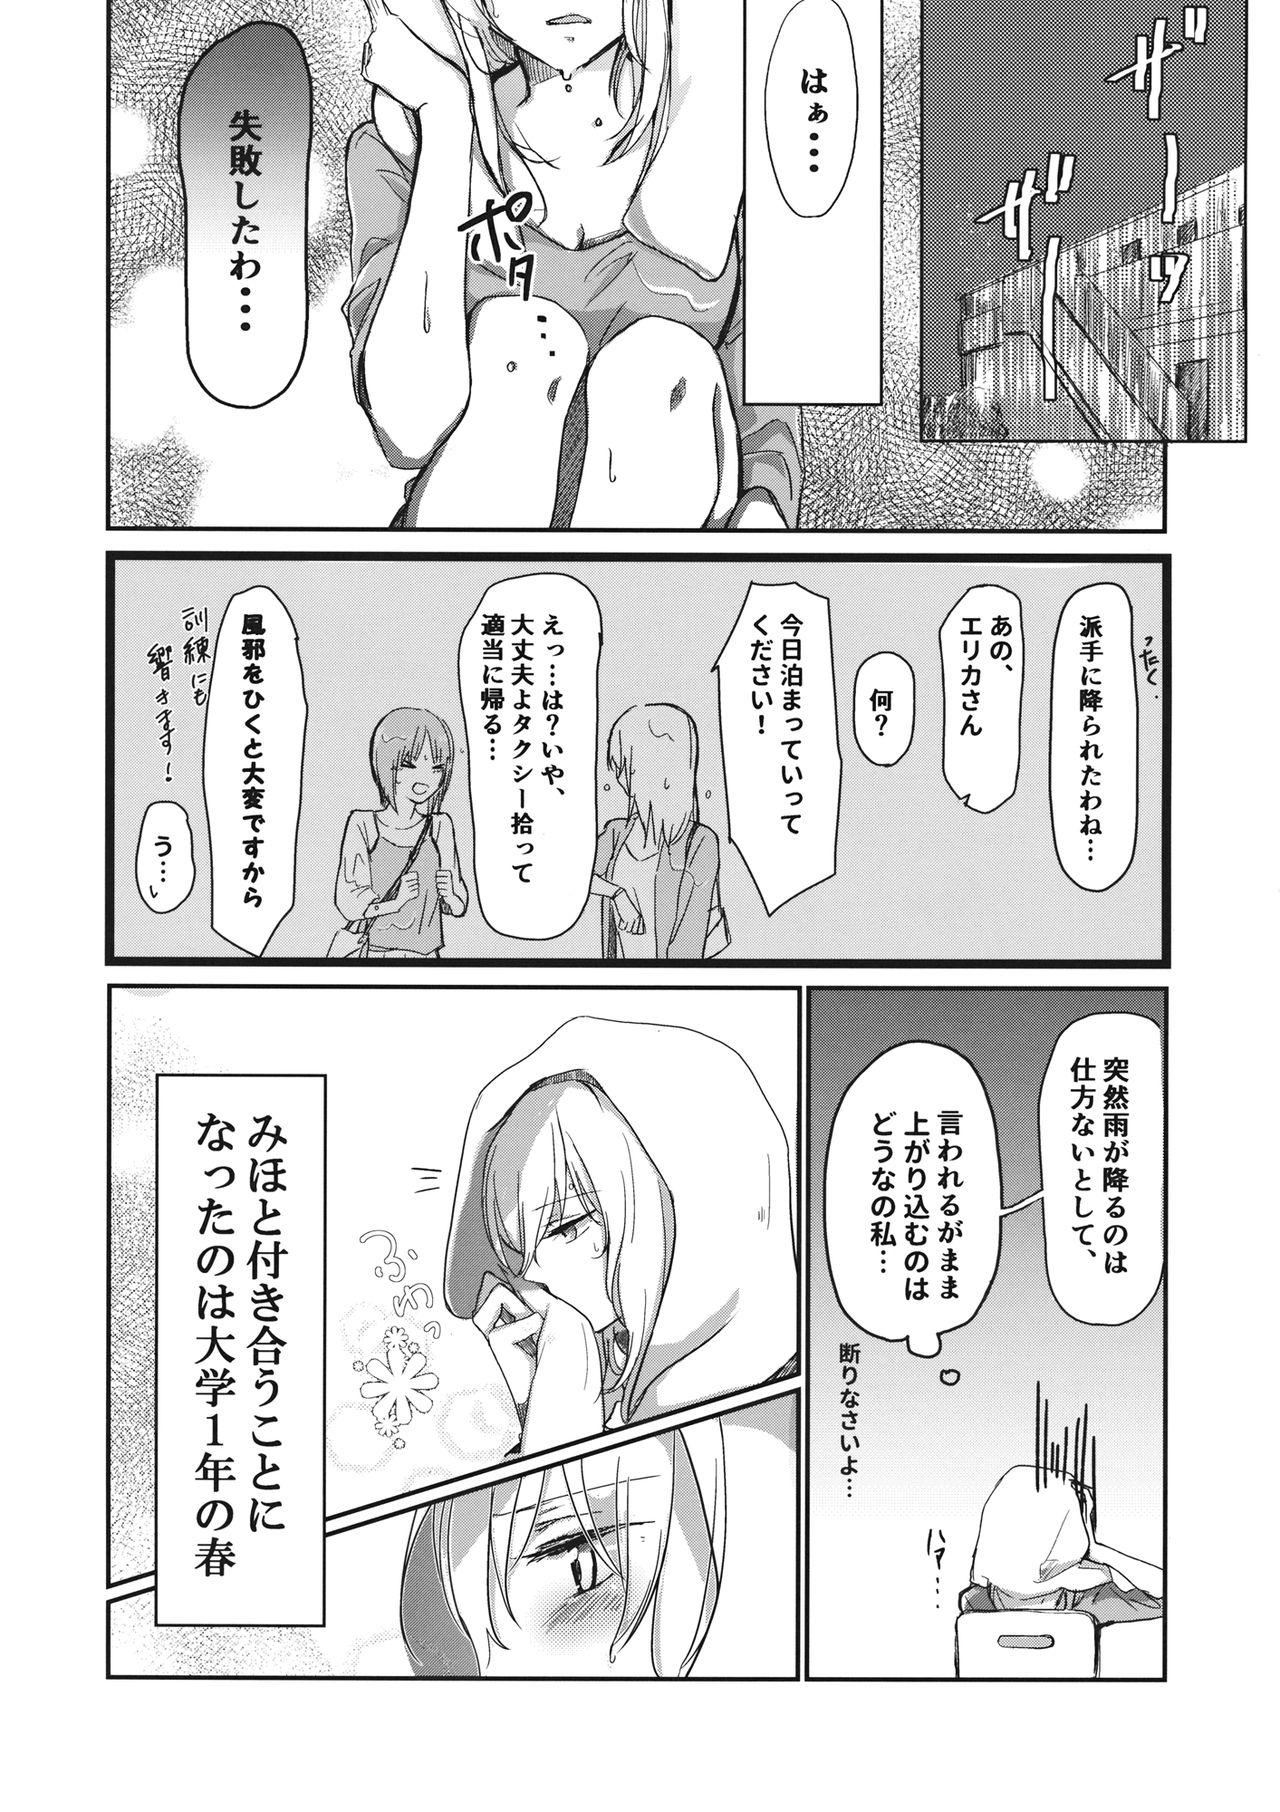 Farting for the first time - Girls und panzer Exibicionismo - Page 3